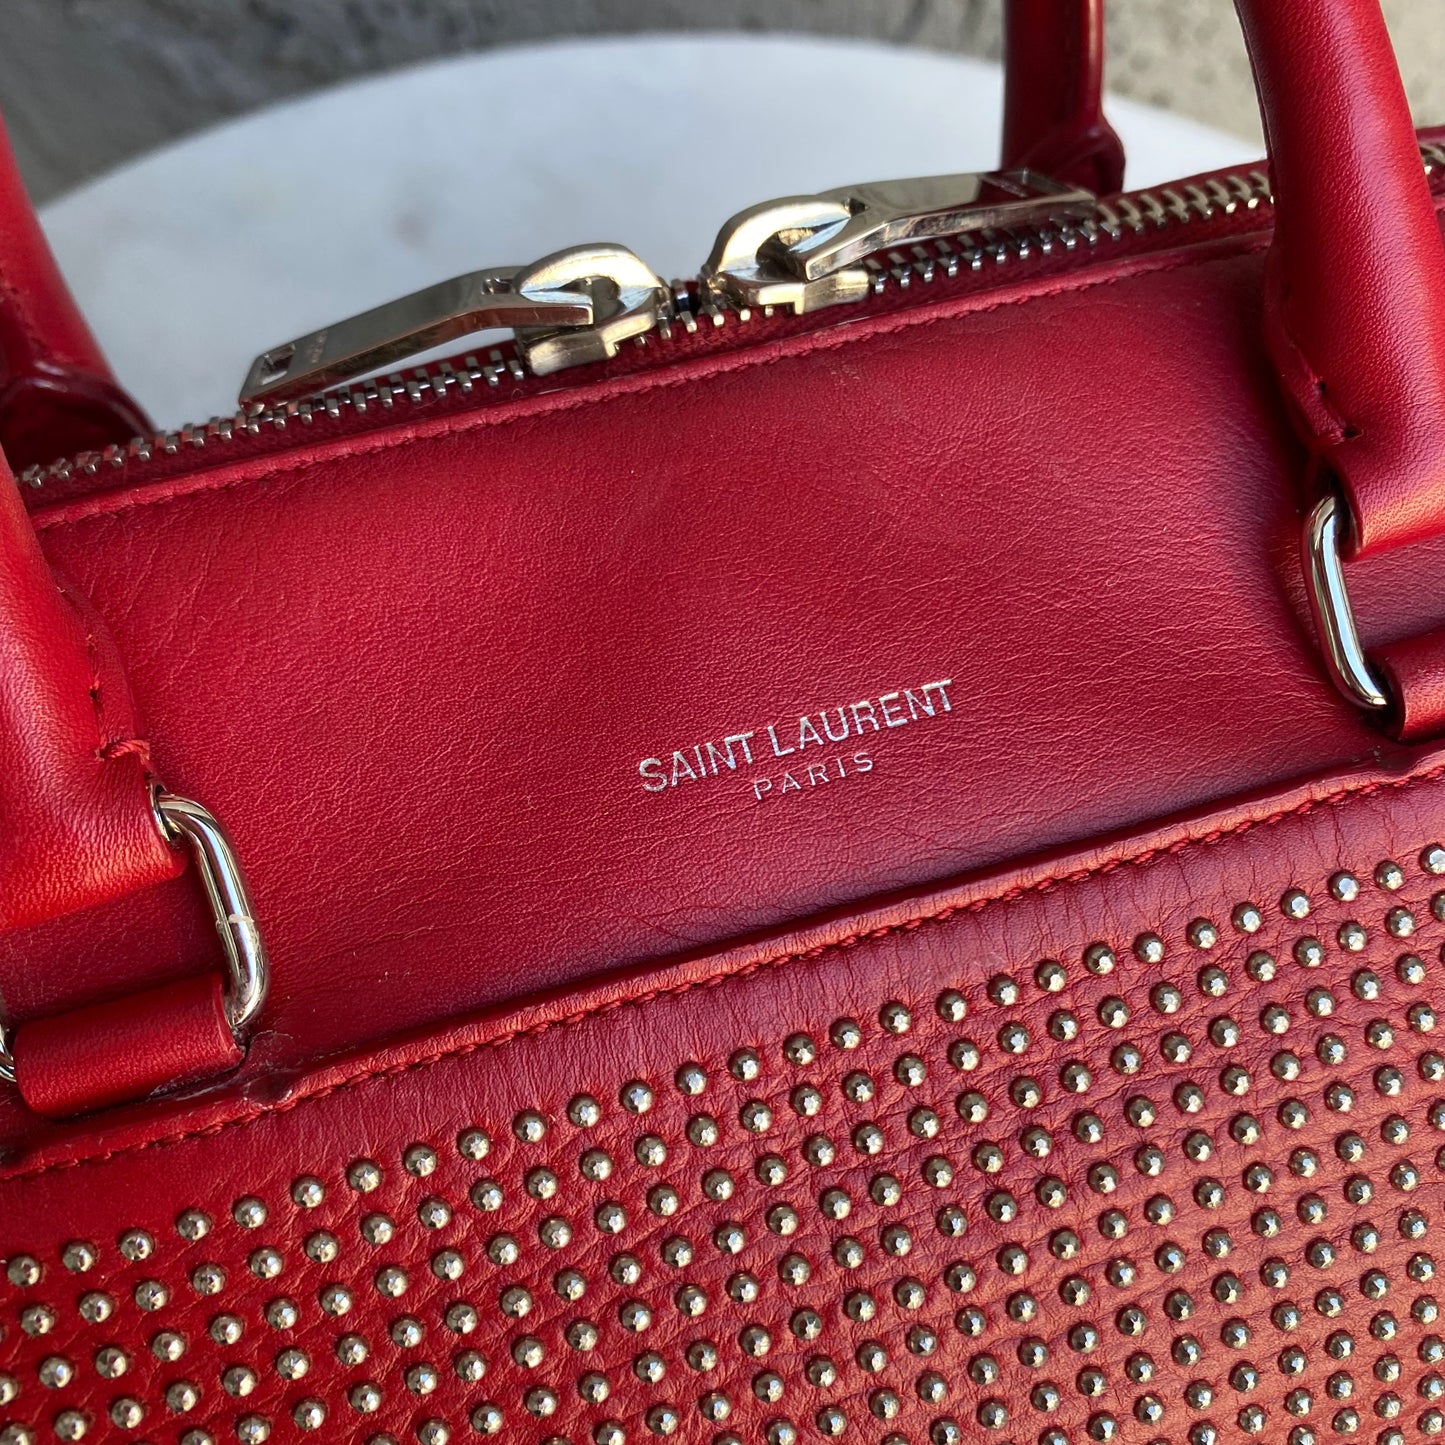 Saint Laurent Classic Baby Studded Leather Duffle